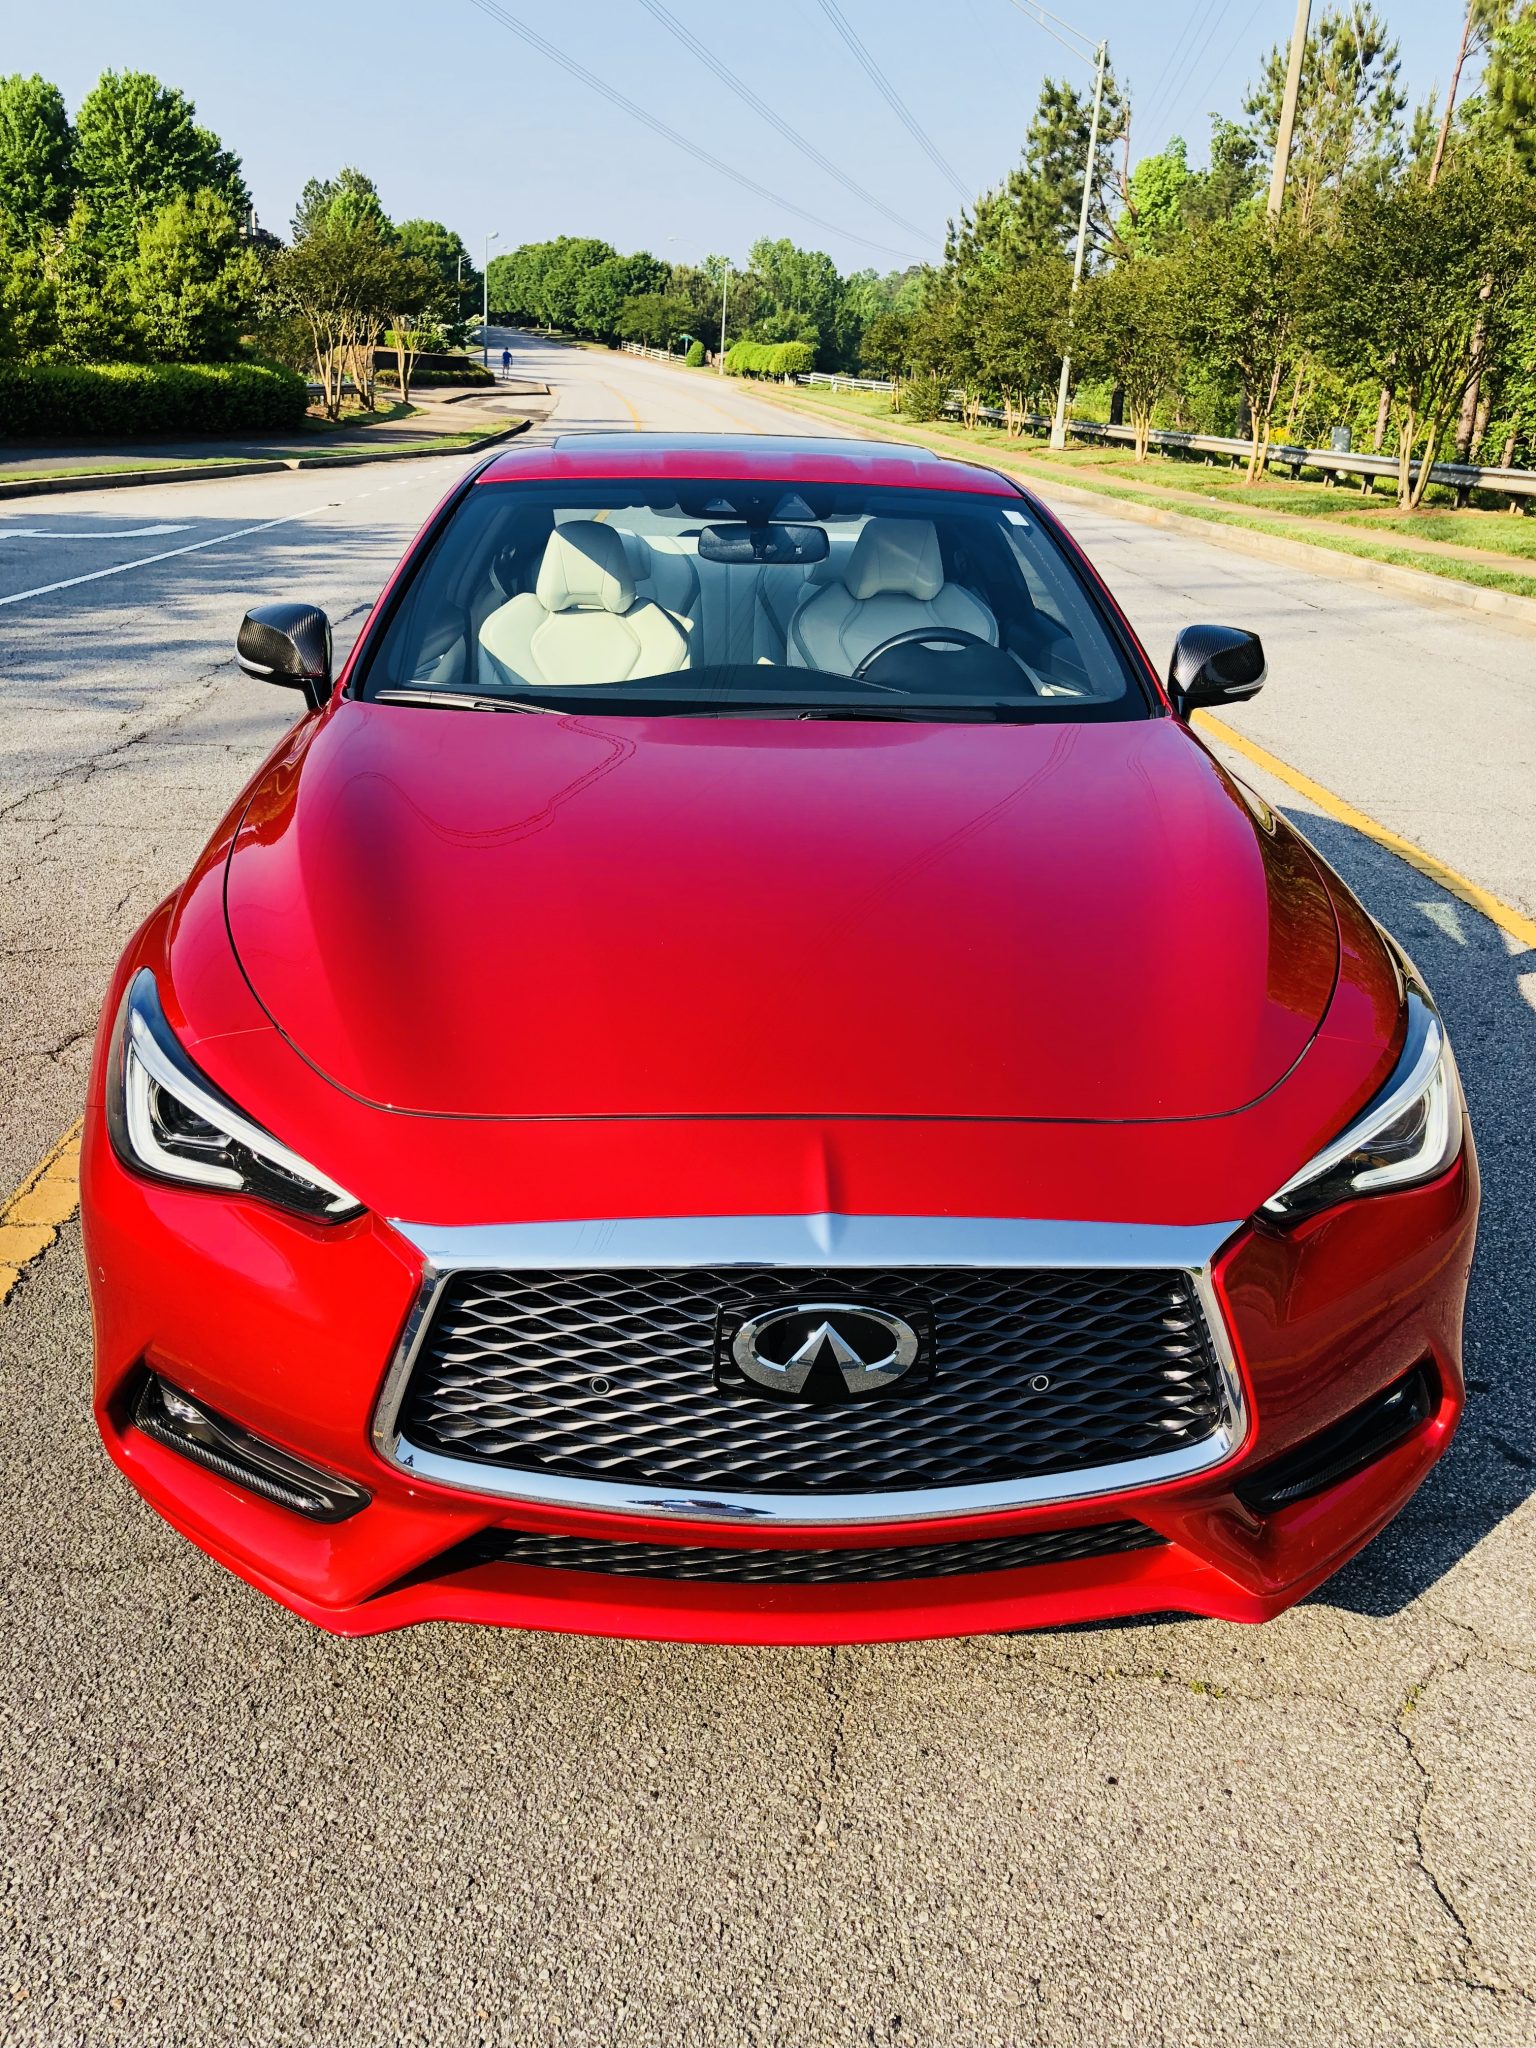 Infiniti Q60 Coupe Has That Fire!